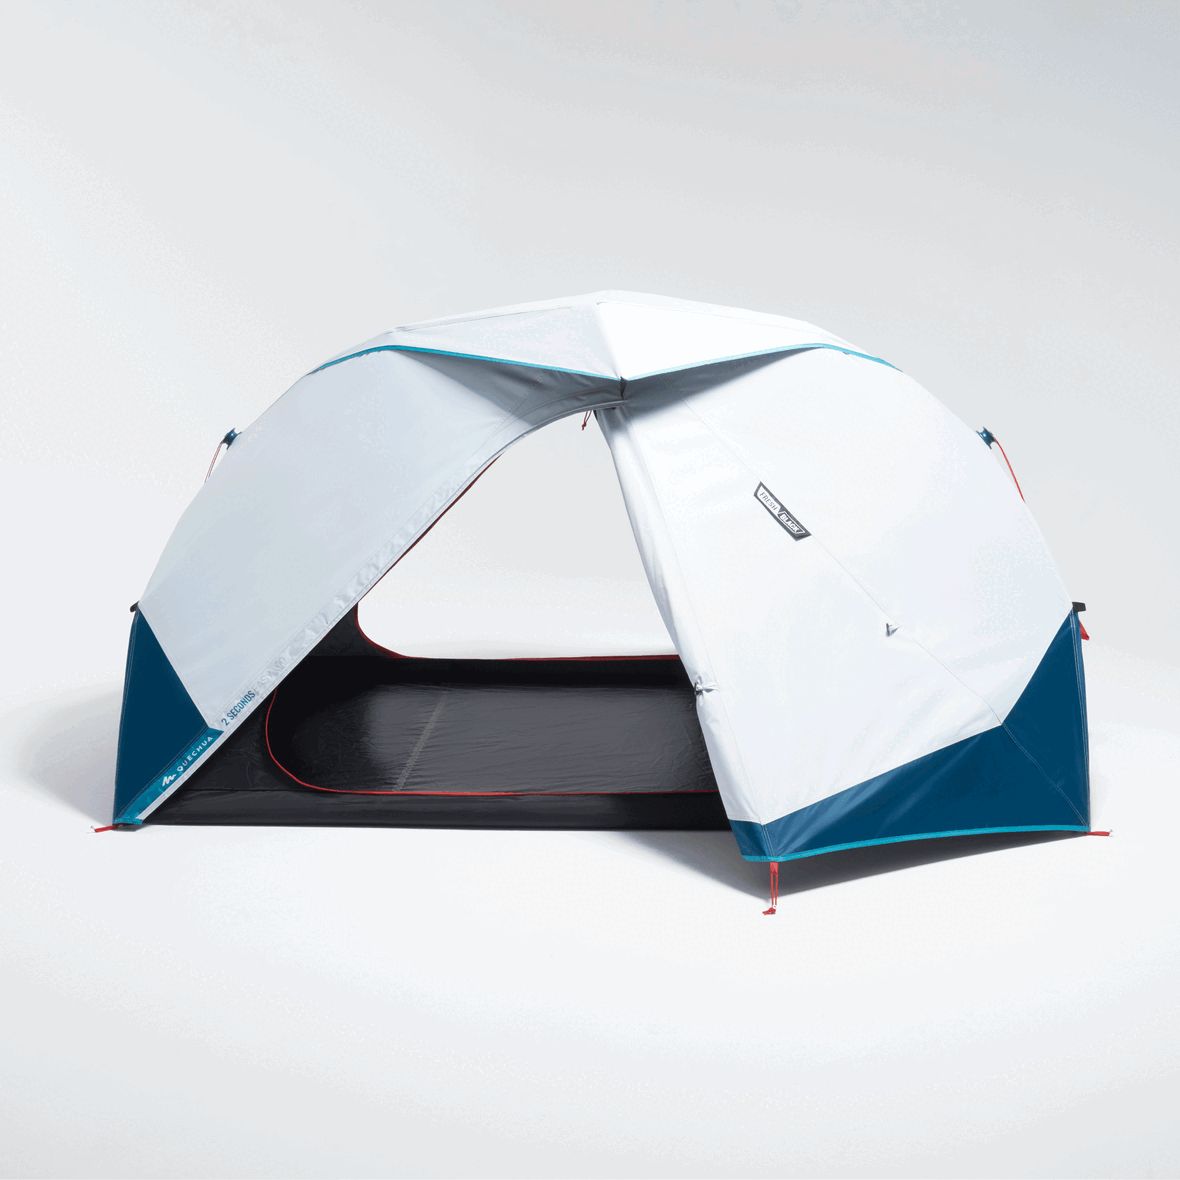 Namiot kempingowy QUICKHIKER ULTRALIGHT - 2 osobowy - FORCLAZ